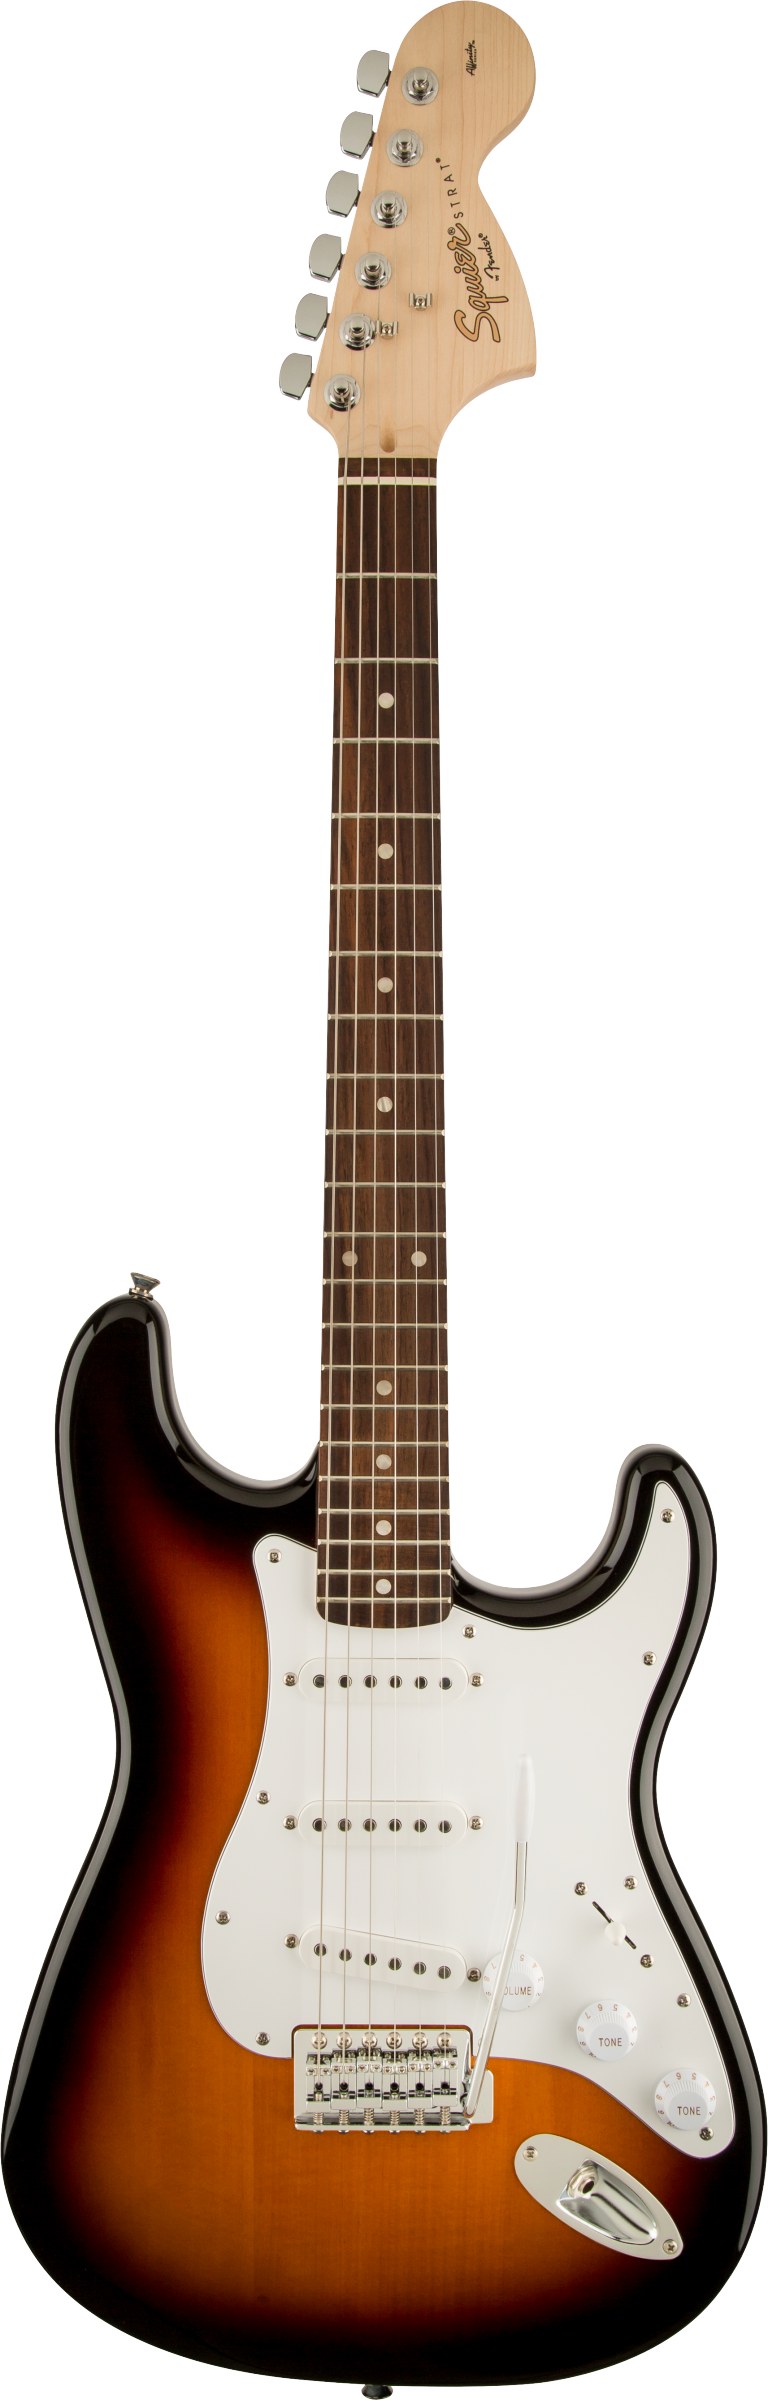 Squier Affinity Stratocaster Electric Guitar in Brown Sunburst